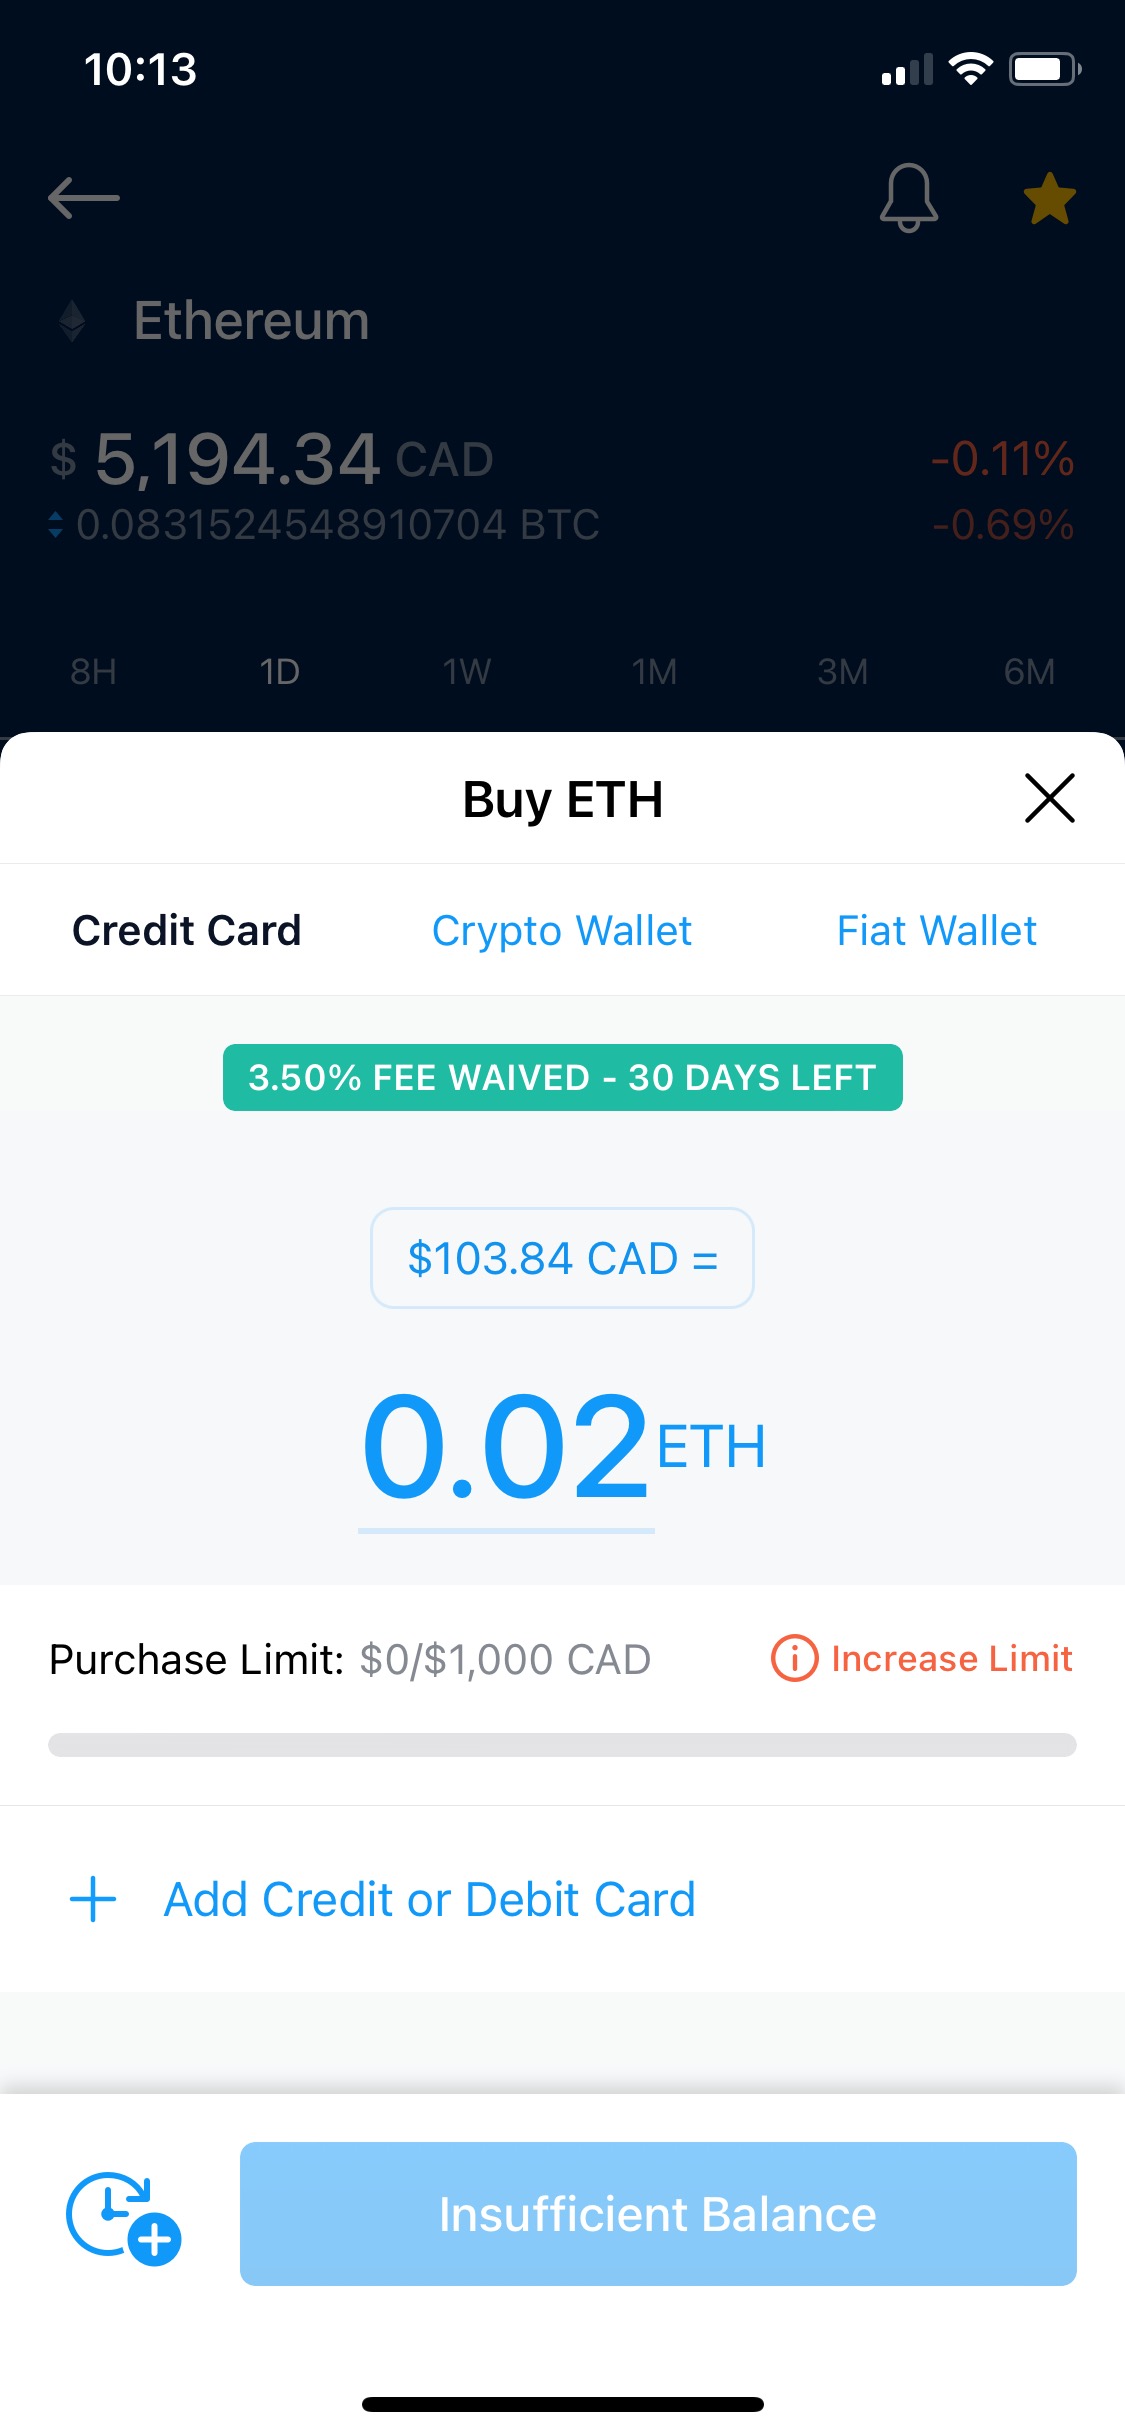 how to buy crypto on iphone